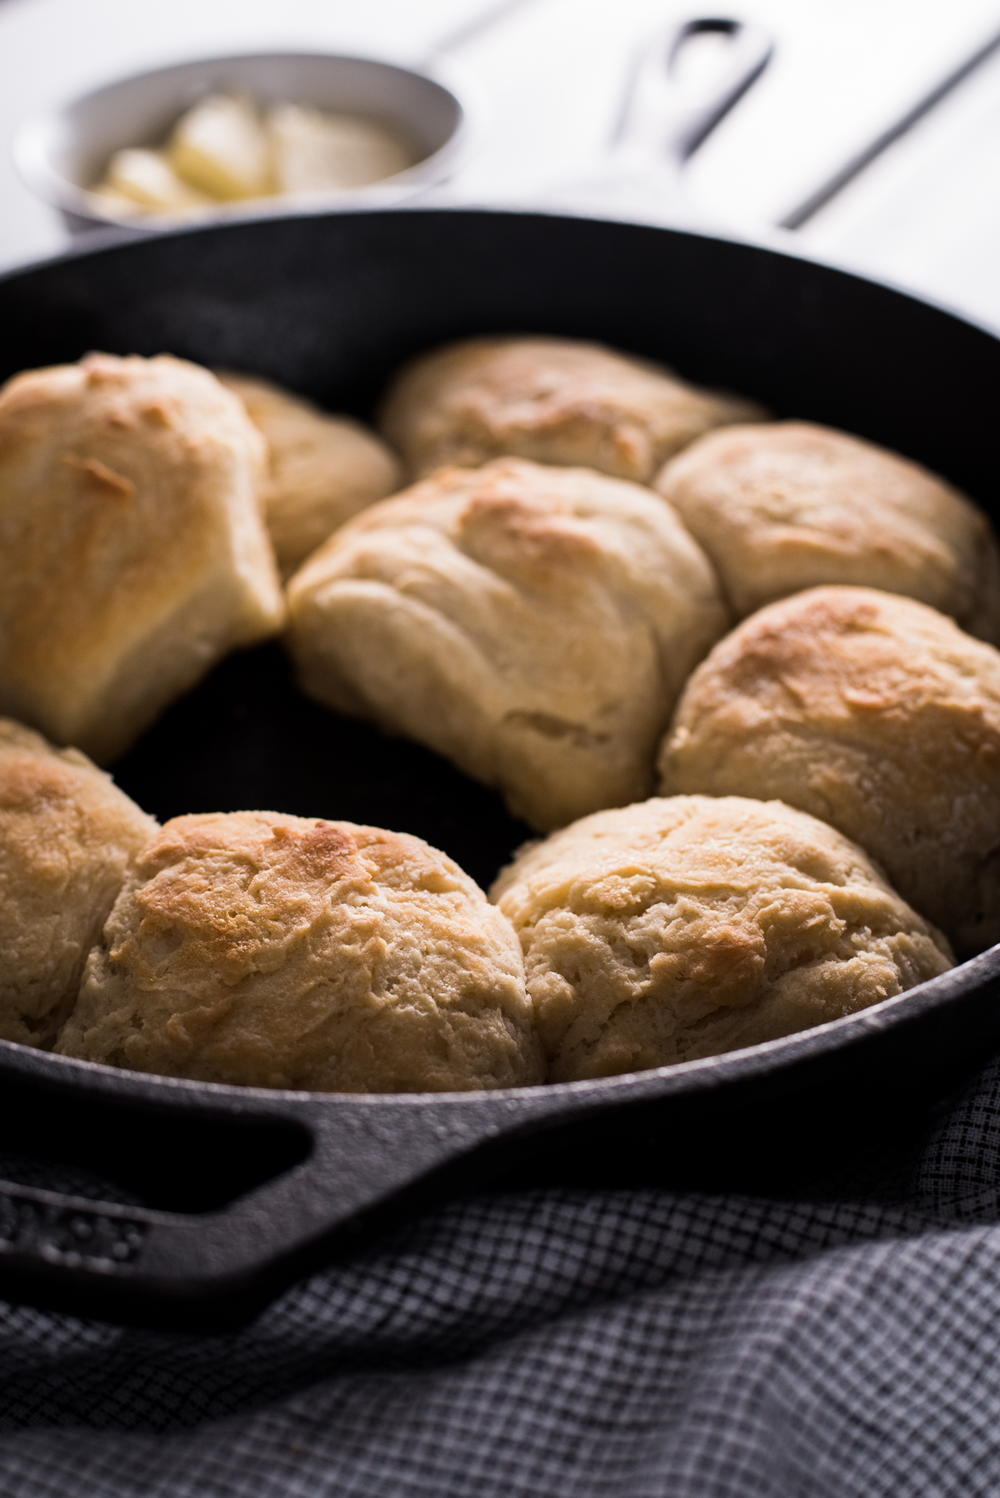 https://irepo.primecp.com/2018/01/361456/easy_cast_iron_skillet_biscuits-7_ExtraLarge1000_ID-2602600.jpg?v=2602600